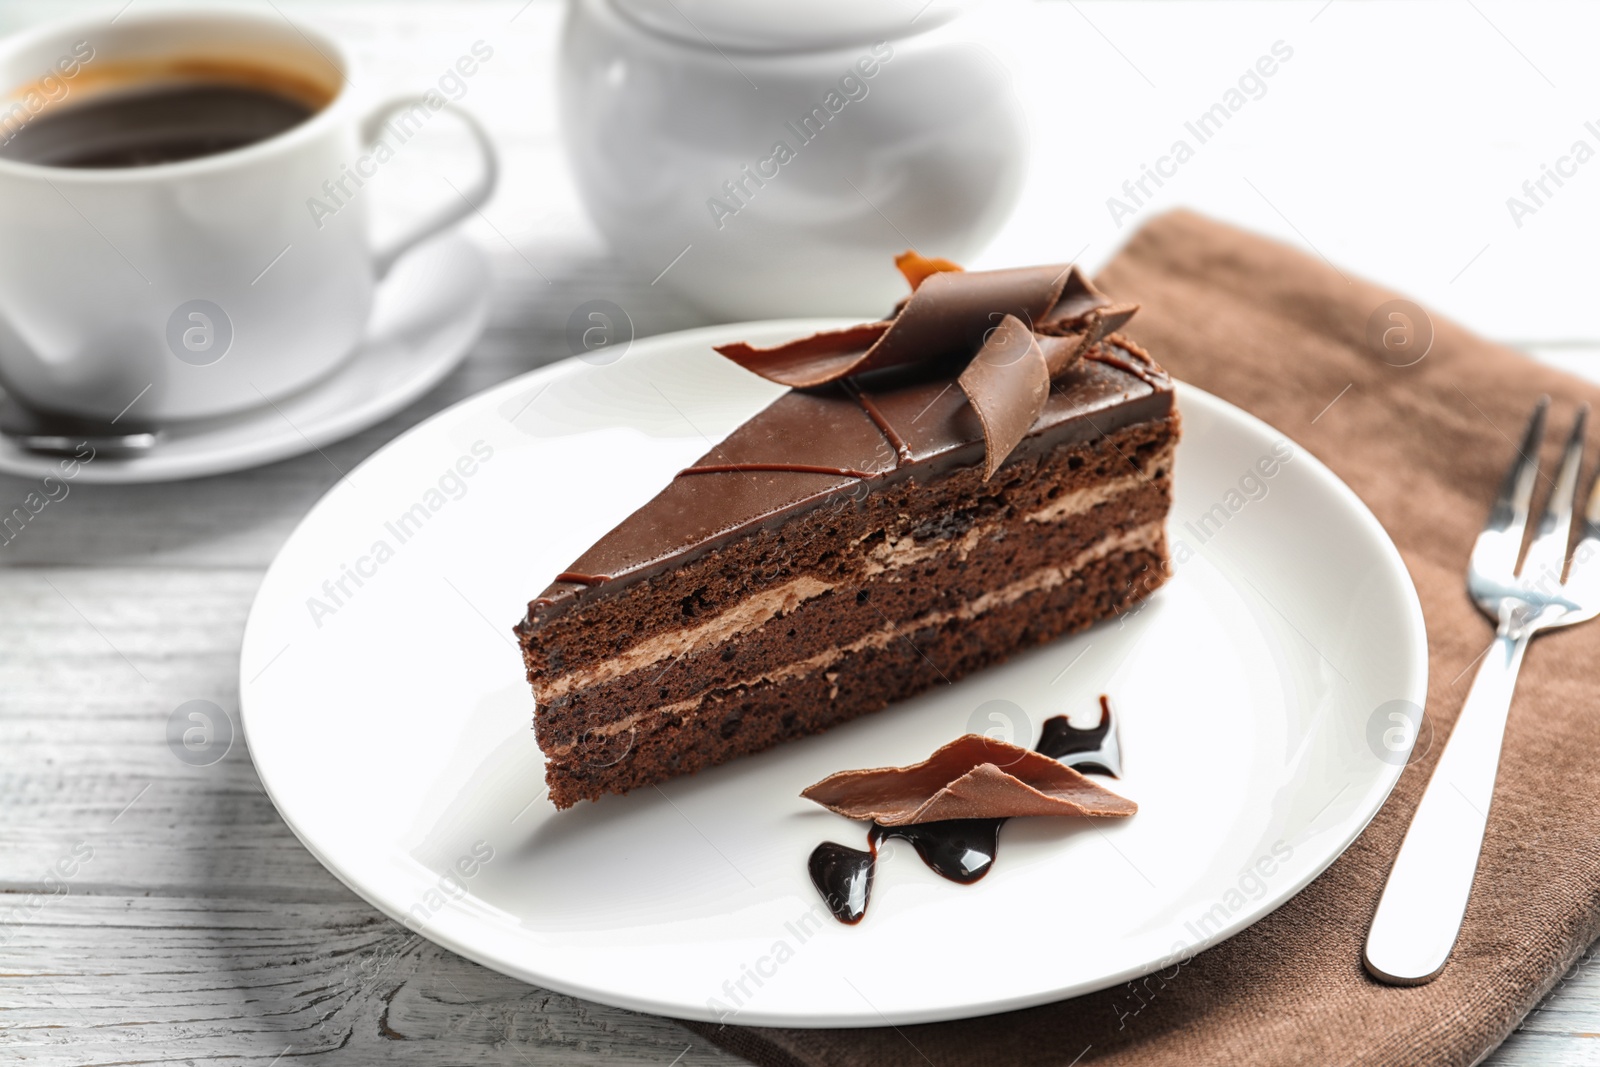 Photo of Plate with slice of homemade chocolate cake served on wooden table